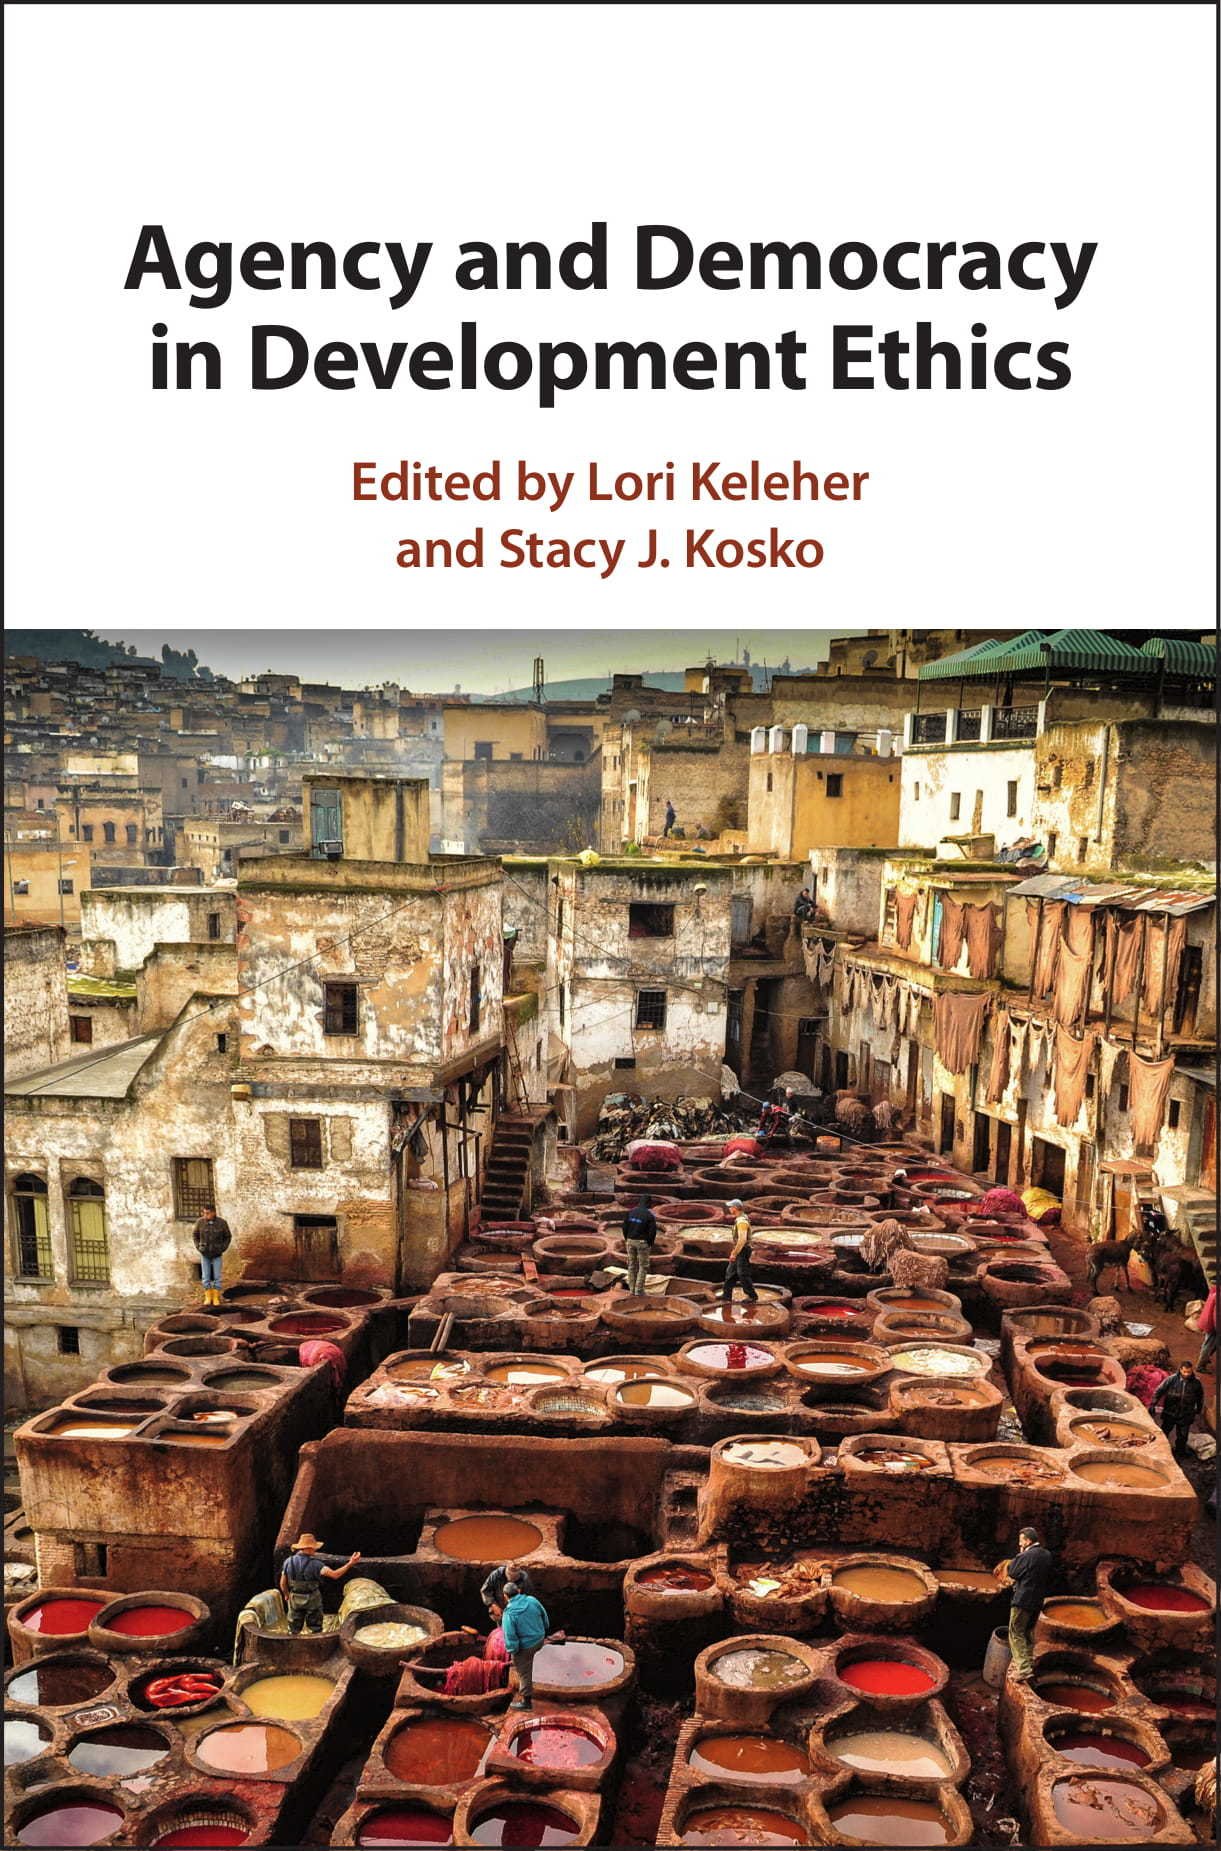 BOOK:  Agency and Democracy in Development Ethics